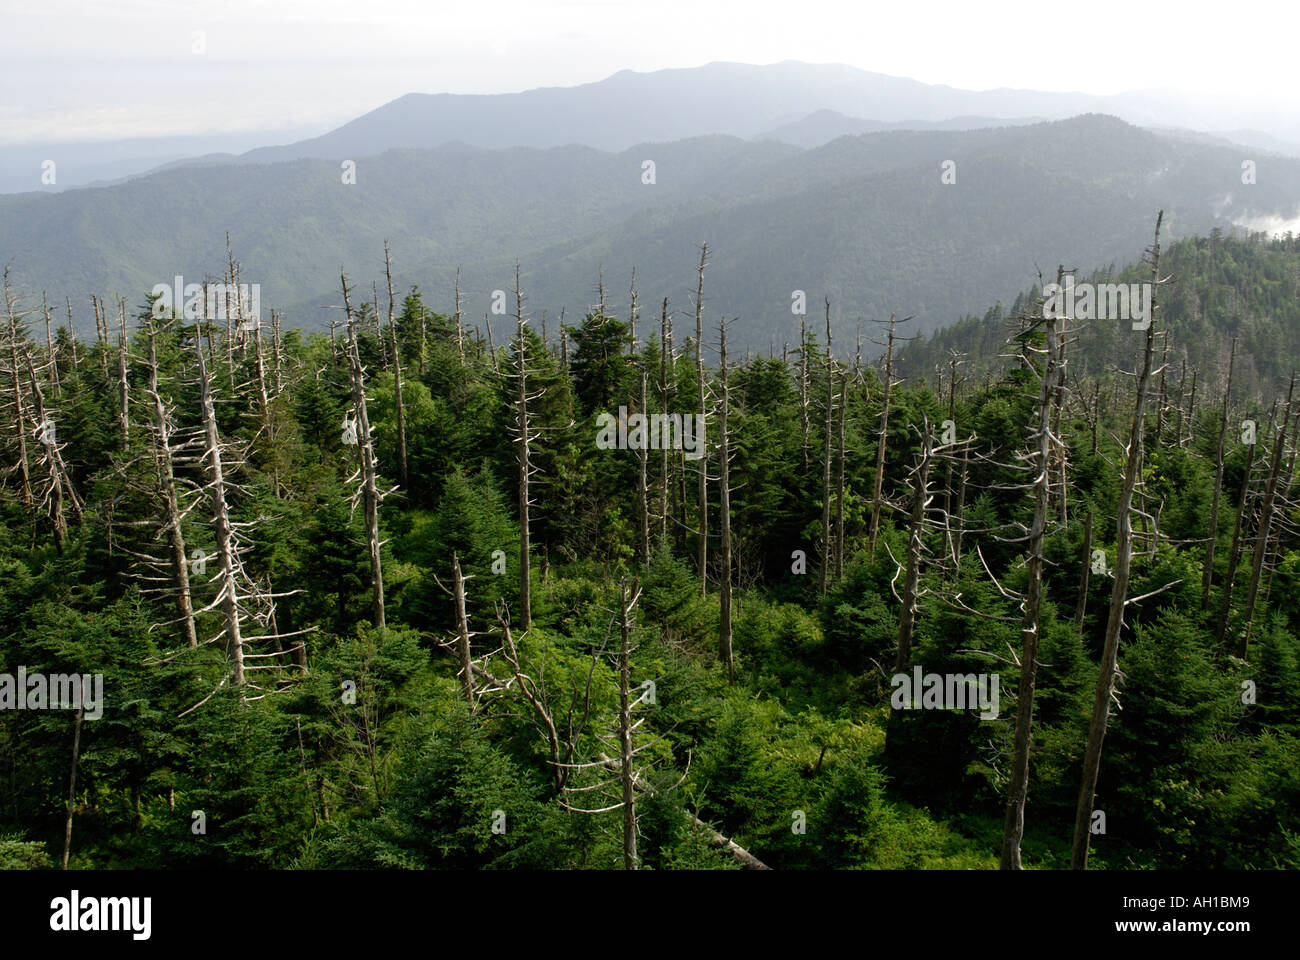 View from Clingman's Dome - Red Spruce, Picea rubens, and Fraser Fir, Abies fraseri, boreal forest at southern location Stock Photo